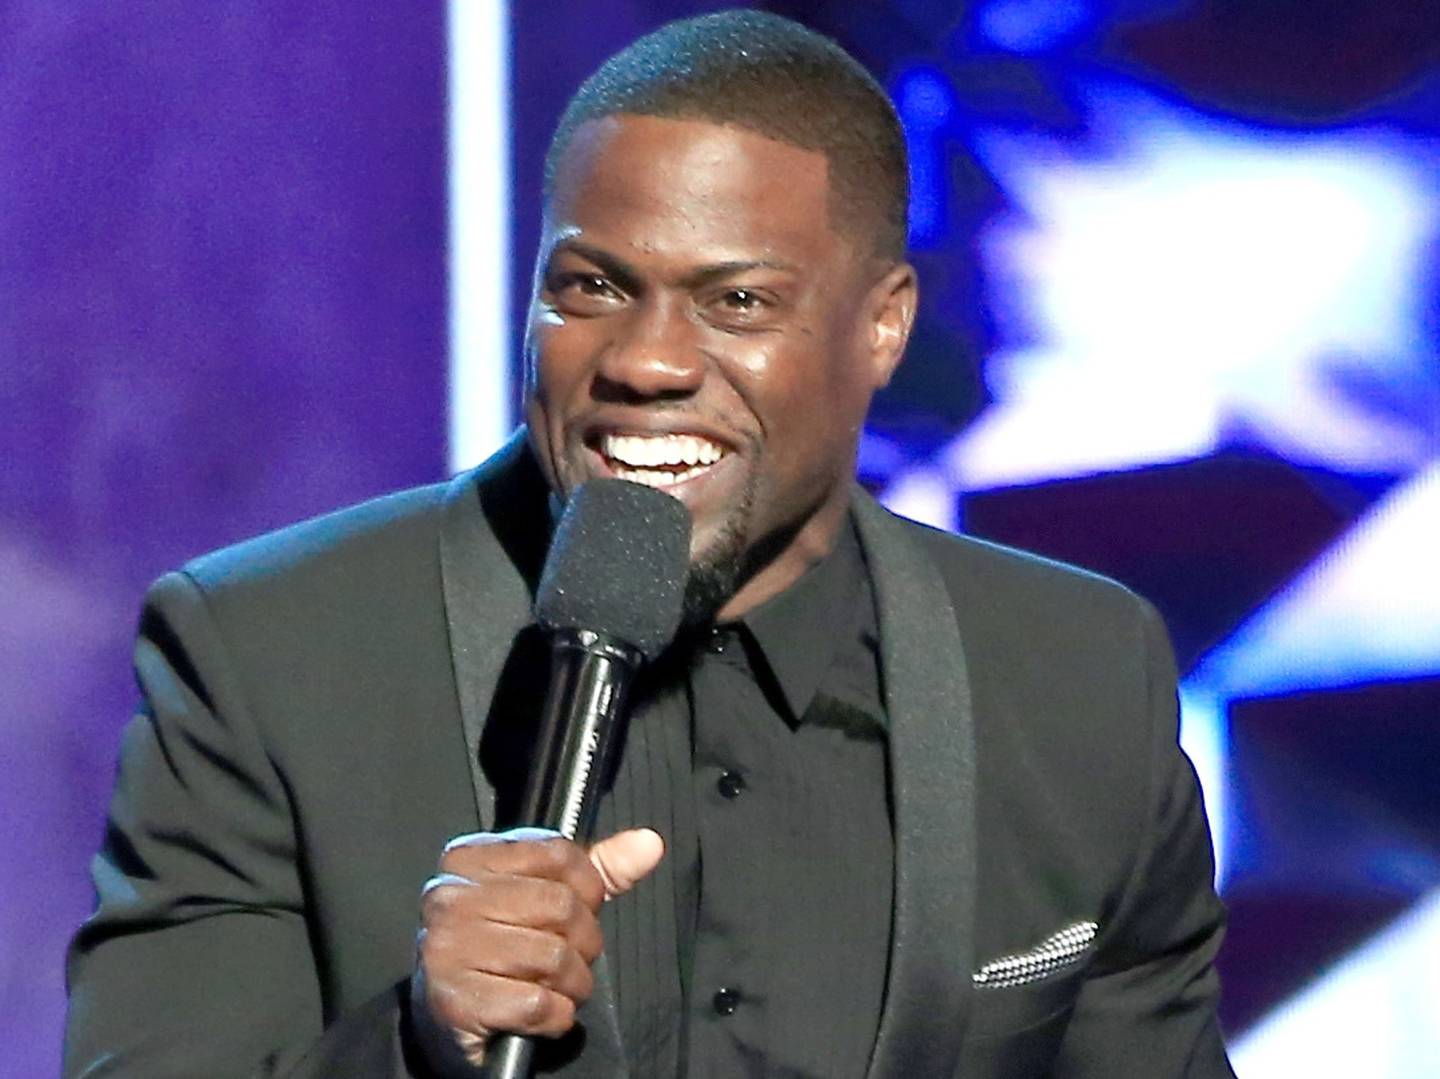 Kevin Hart will be in town for his Reality Check Tour.